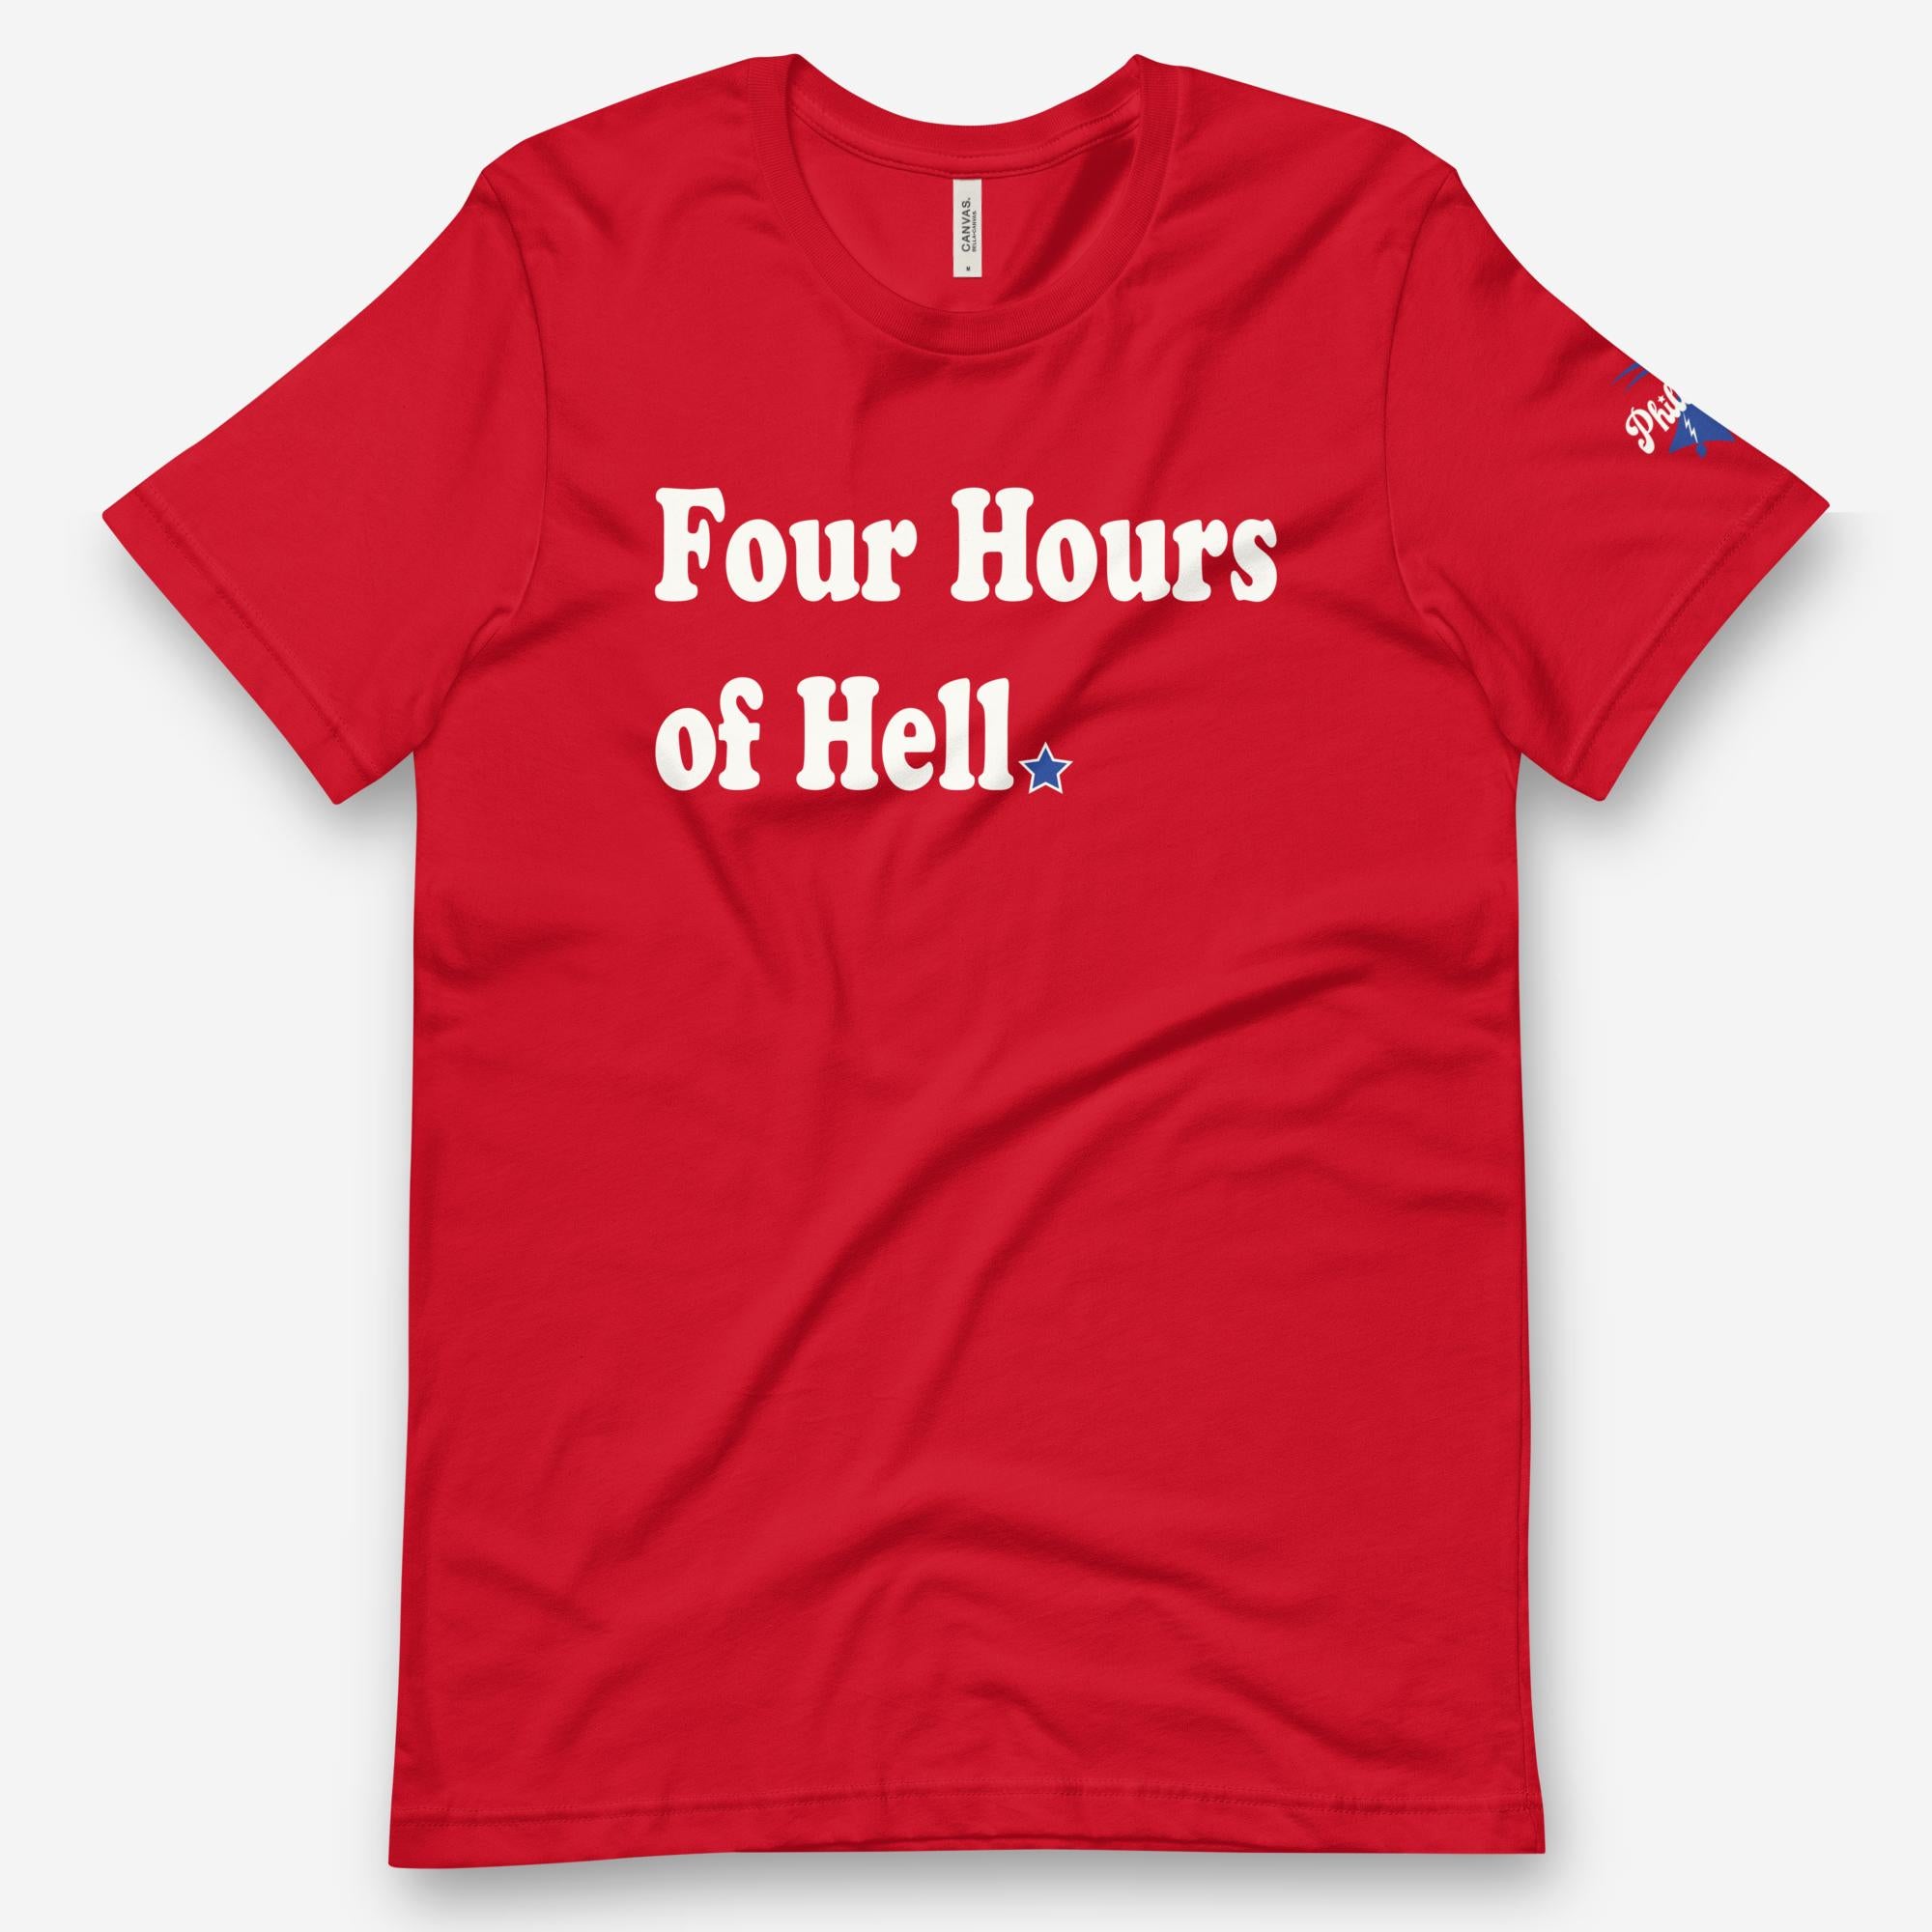 "Four Hours of Hell" Tee